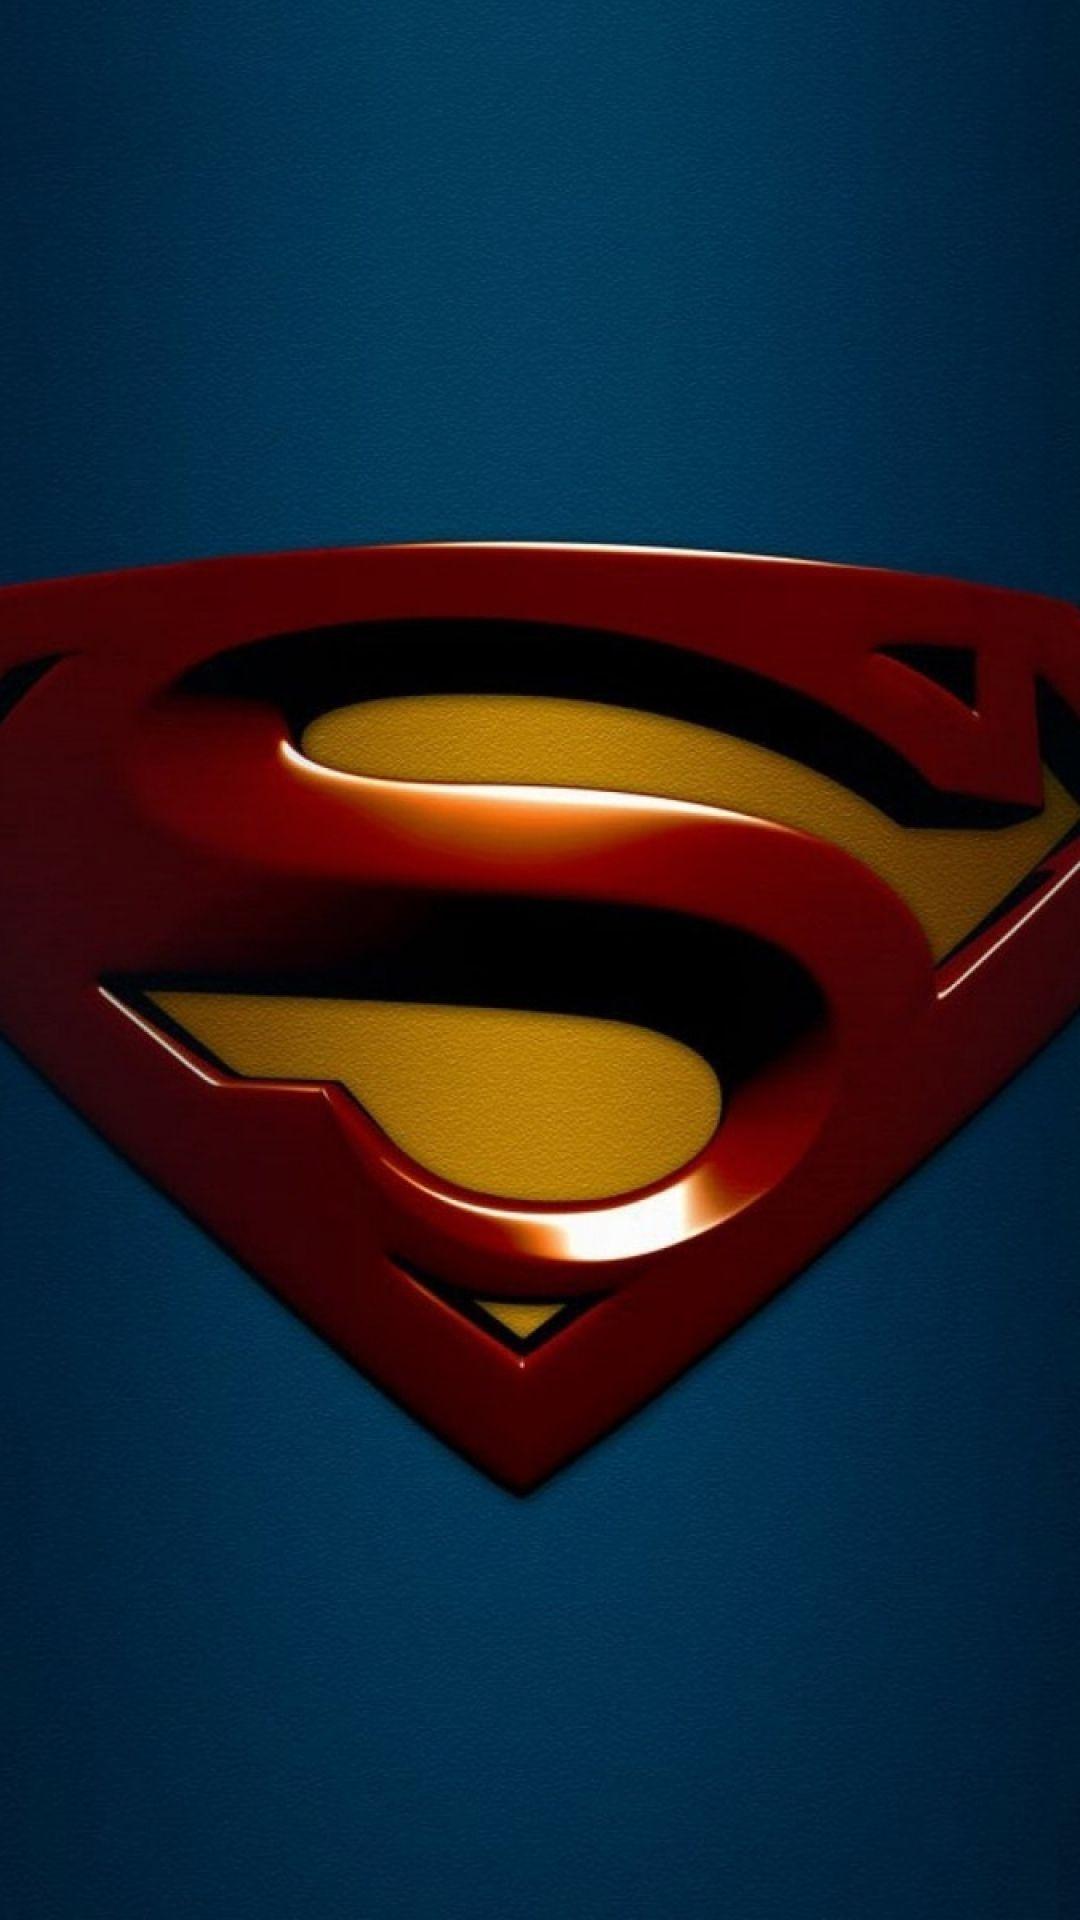 White and Blue Superman Logo - HD Background Superman Logo Blue Red S Wallpaper | WallpapersByte